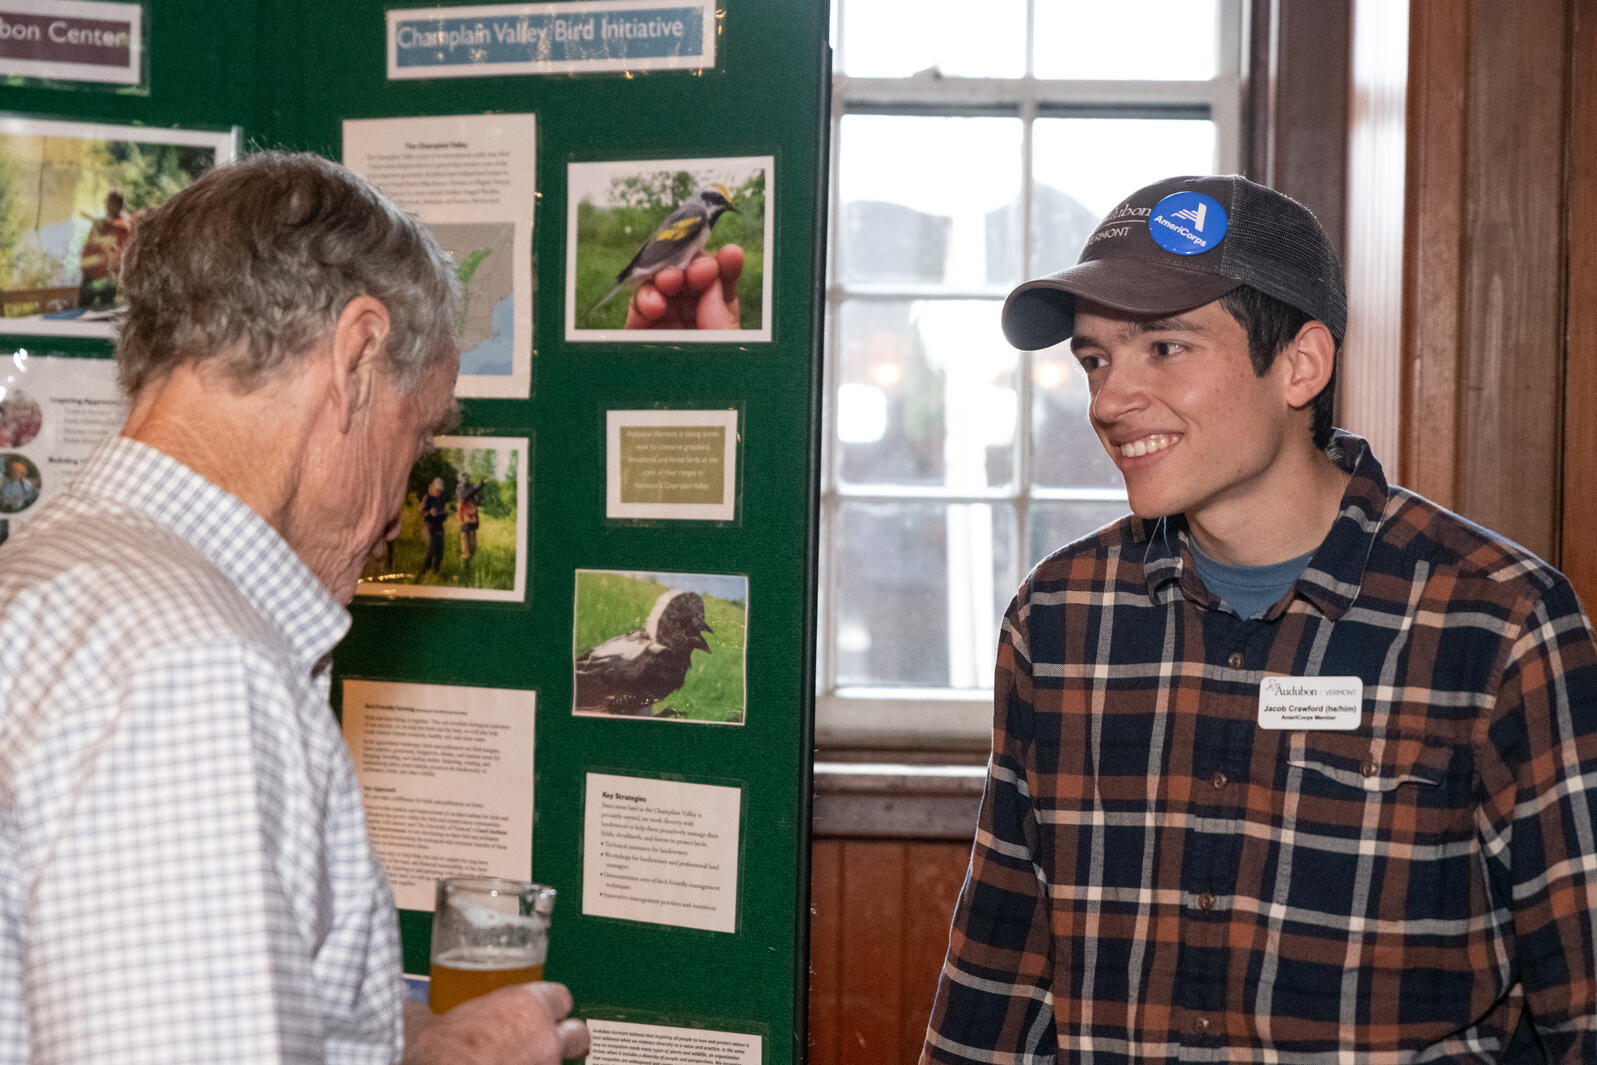 Jacob Crawford, right, smiles at an event attendee, left, who is reading from Audubon Vermont’s programming display. 